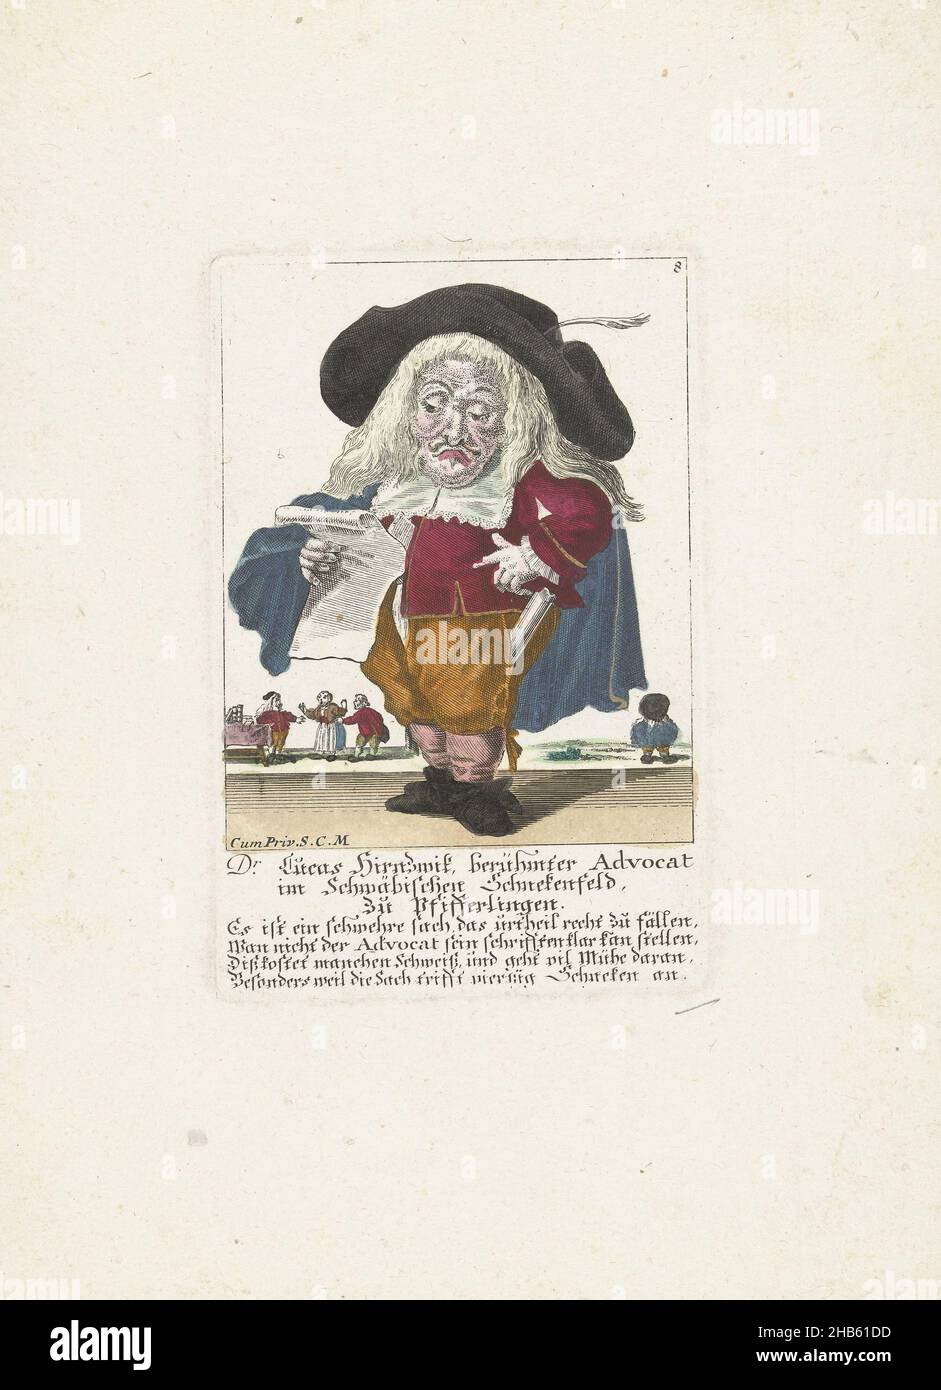 The dwarf Lucas Hirnzwik as a lawyer, c. 1710, Dr. Lucas Hirnzwik, berühmter Advocat im Schwäbischen Schnekenfeld, zu Pfifferlingen (title on object), Il Callotto resurcitato oder Neu eingerichtes Zwerchen Cabinet (series title), A dwarf Lucas Hirnzwik as a lawyer studying a document. In the caption below the title, a four-line verse in German. Numbered top right: 8. Part of a loose-leaf edition from c. 1710 of a series of caricatures featuring dwarfs, known as The Dwarf Stage., print maker: Martin Engelbrecht (attributed to), unknown (mentioned on object), Augsburg, 1705 - 1715, paper Stock Photo